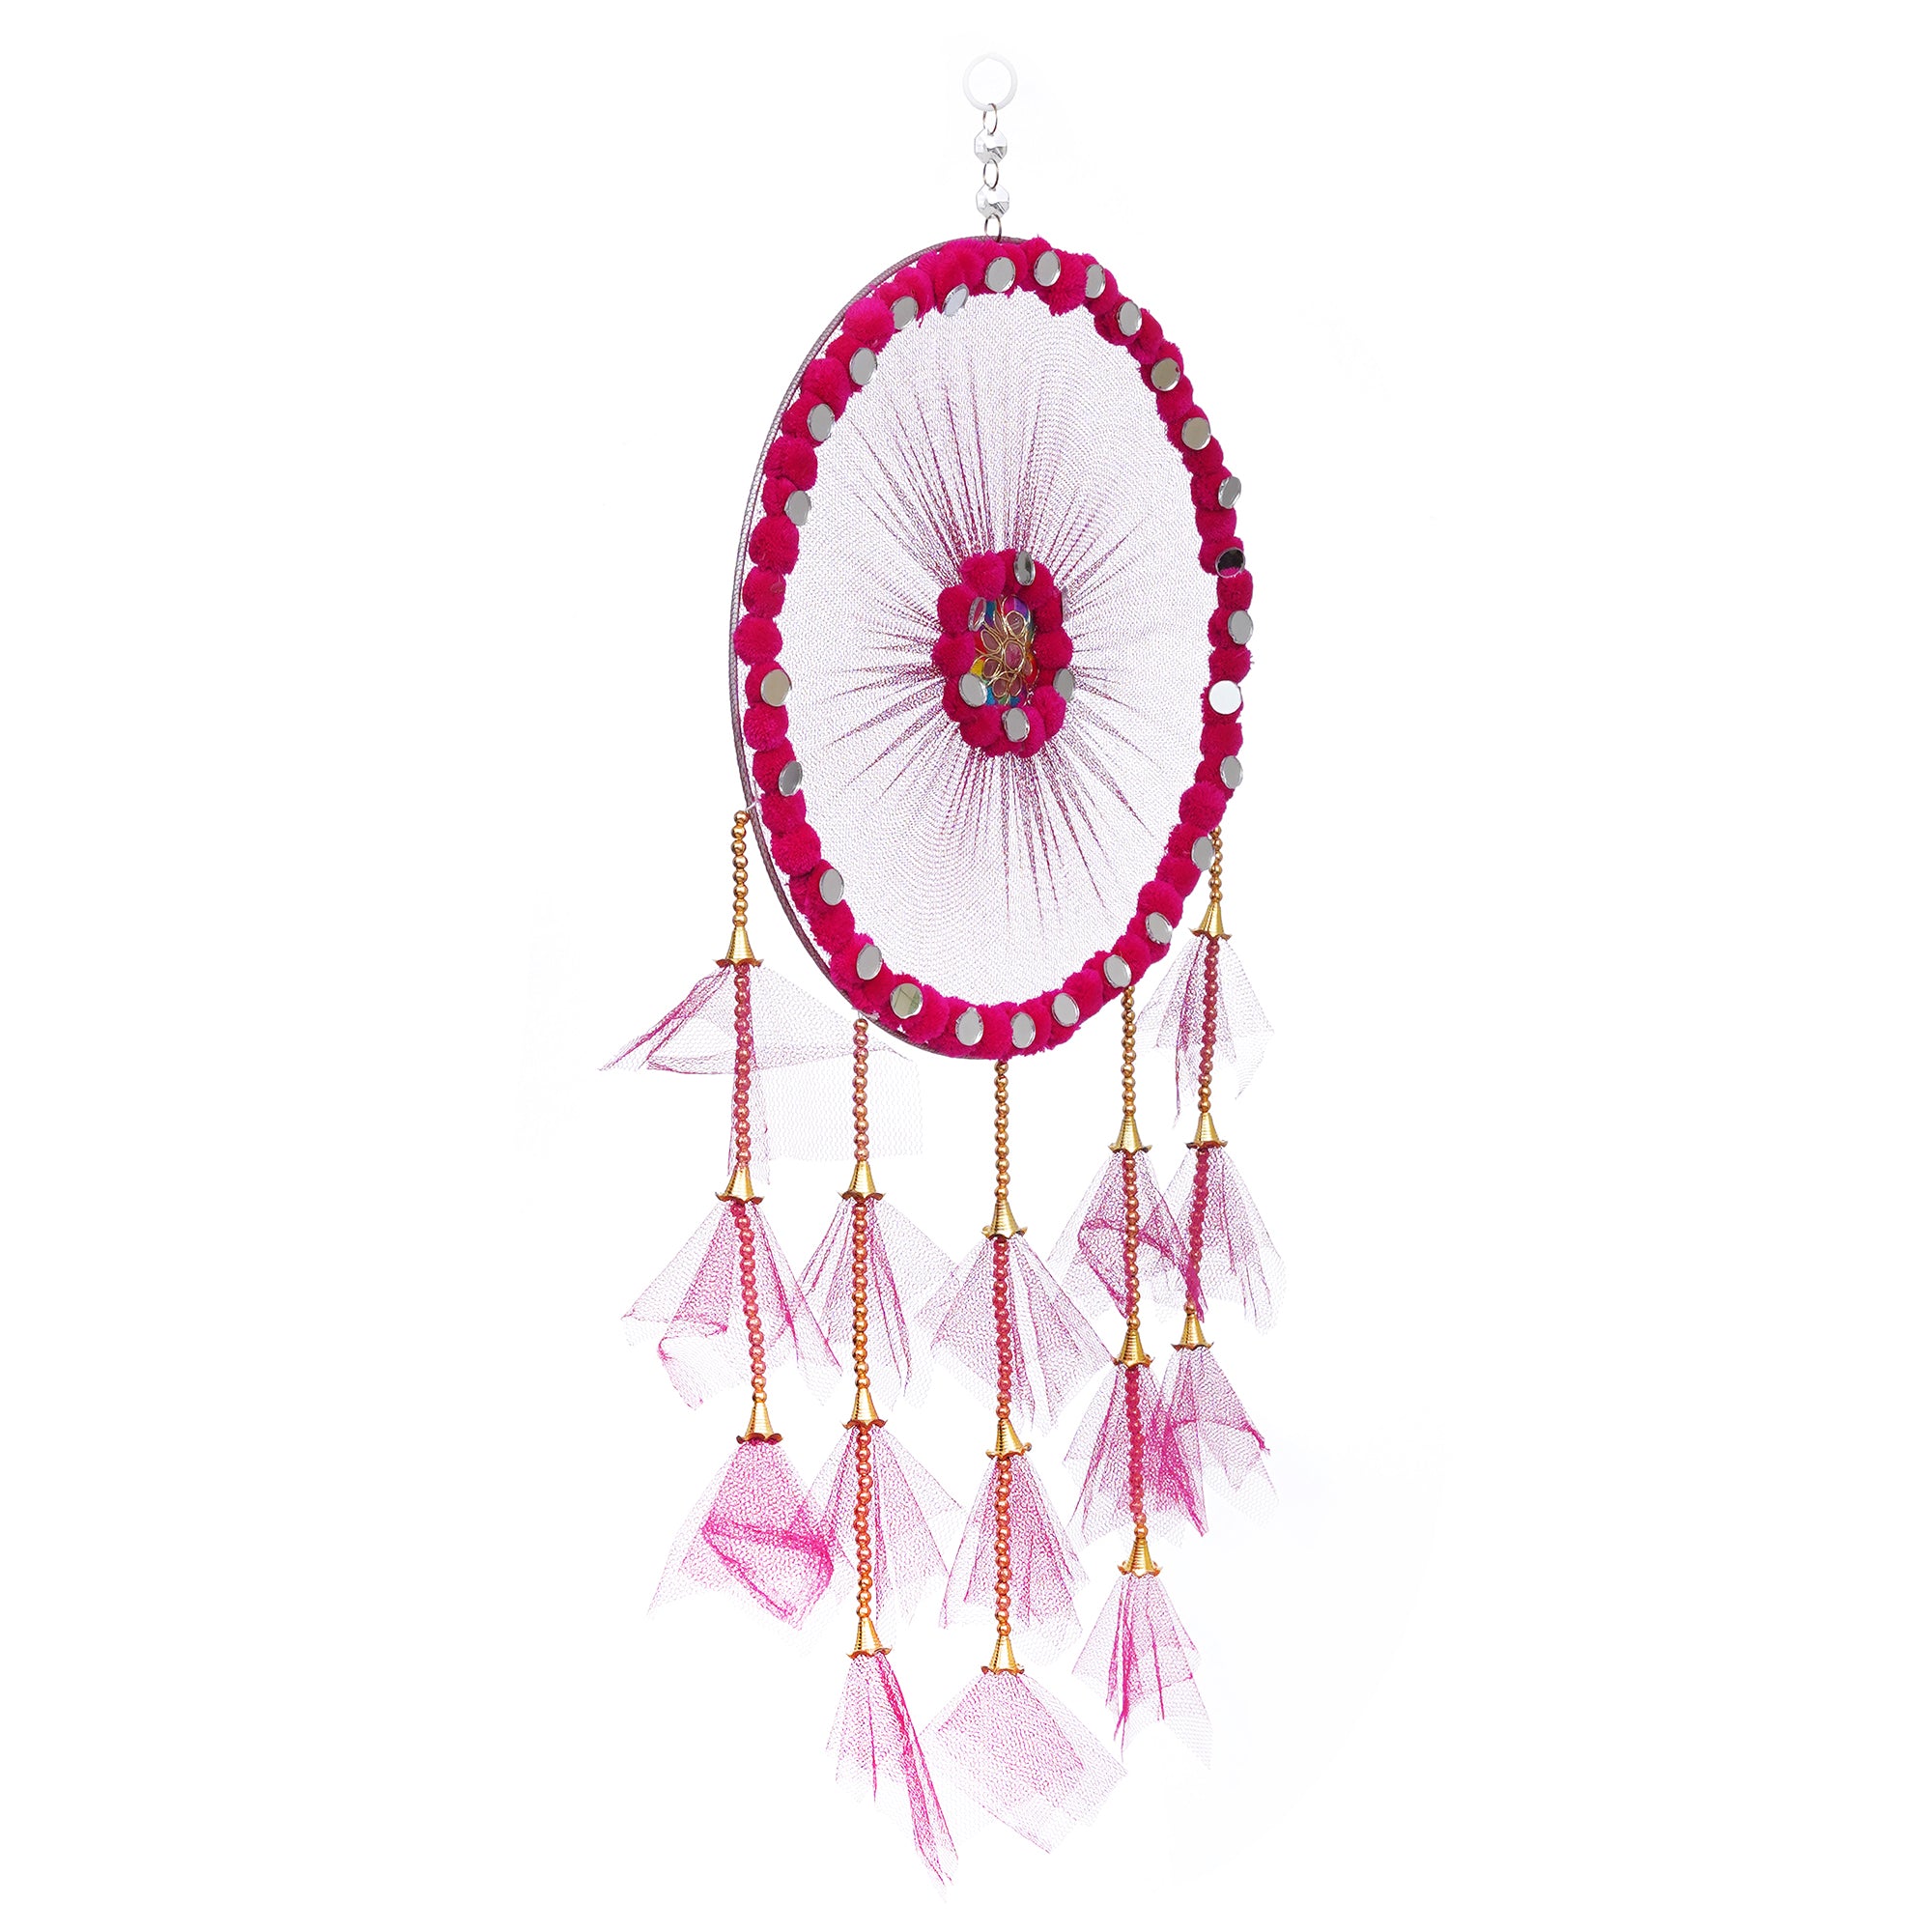 eCraftIndia Pink Wall Hanging Dream Catcher For Home Decor - Perfect Window, Bedroom, Living Room, Wall Decoration Item 7